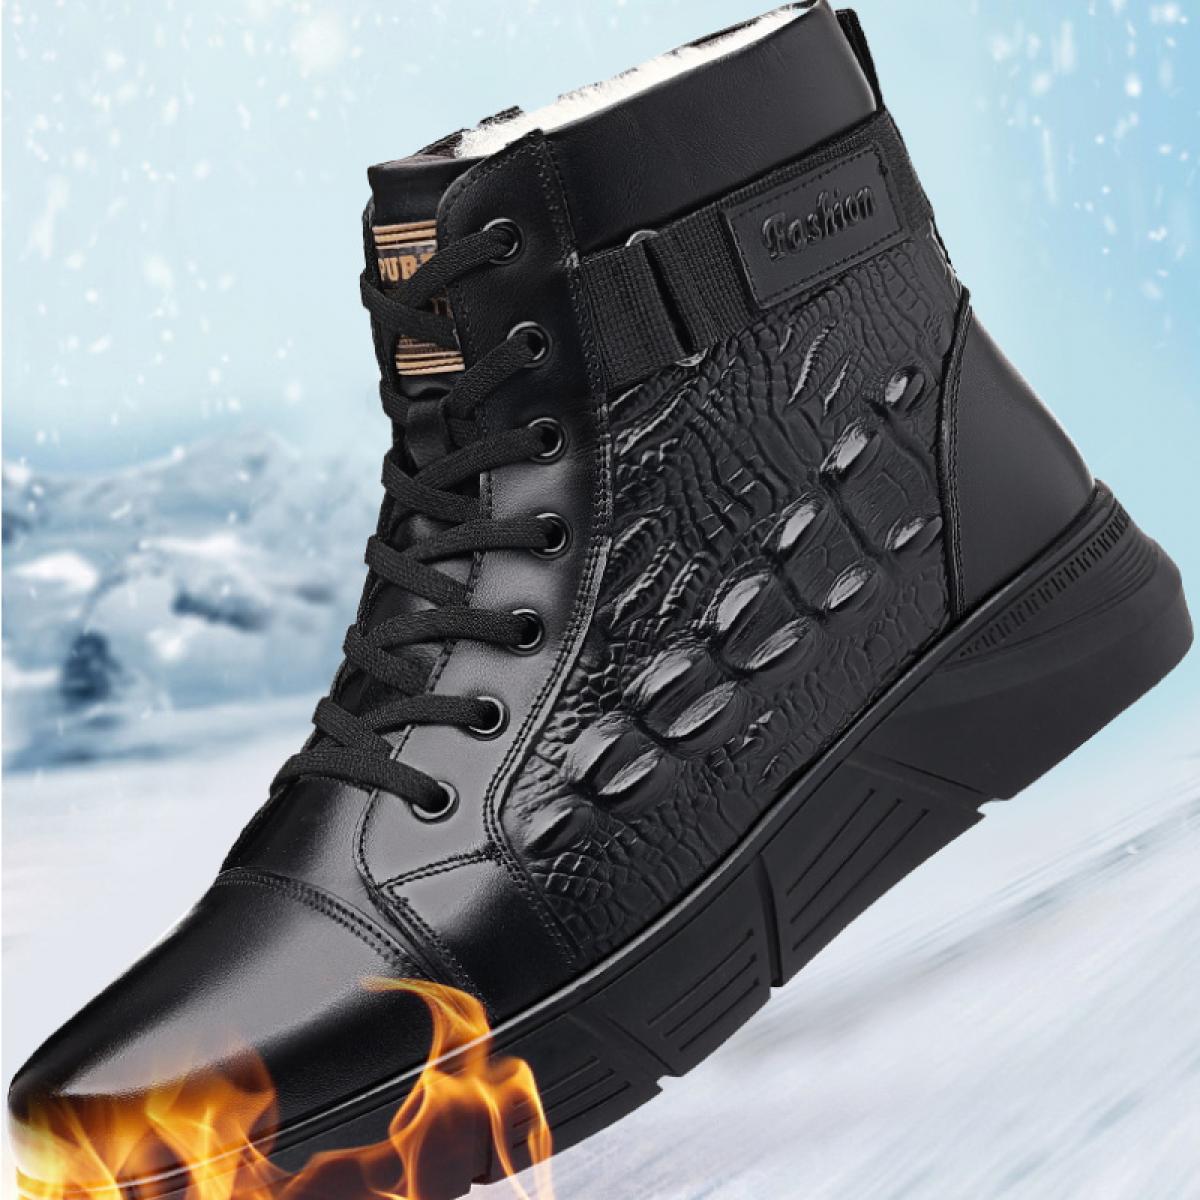 Men's Winter Waterproof Cotton Shoes Round Head Casual Warm Snow Boots Thickened Non Slip Comfort Leather Boots Bota Mas